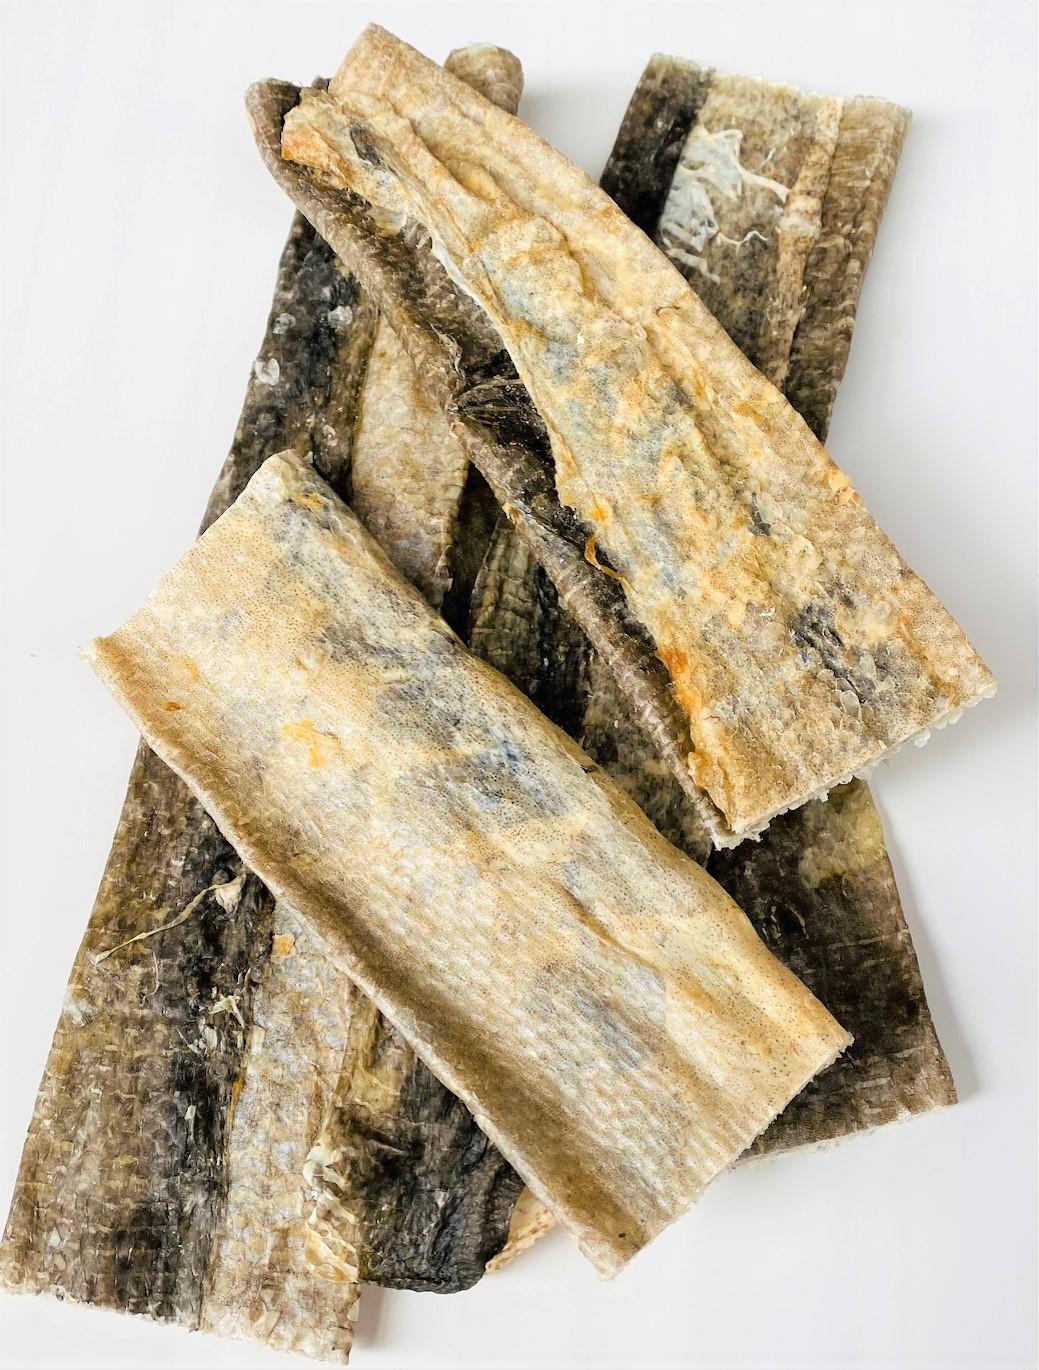 Are Dried Fish Skins Good For Dogs